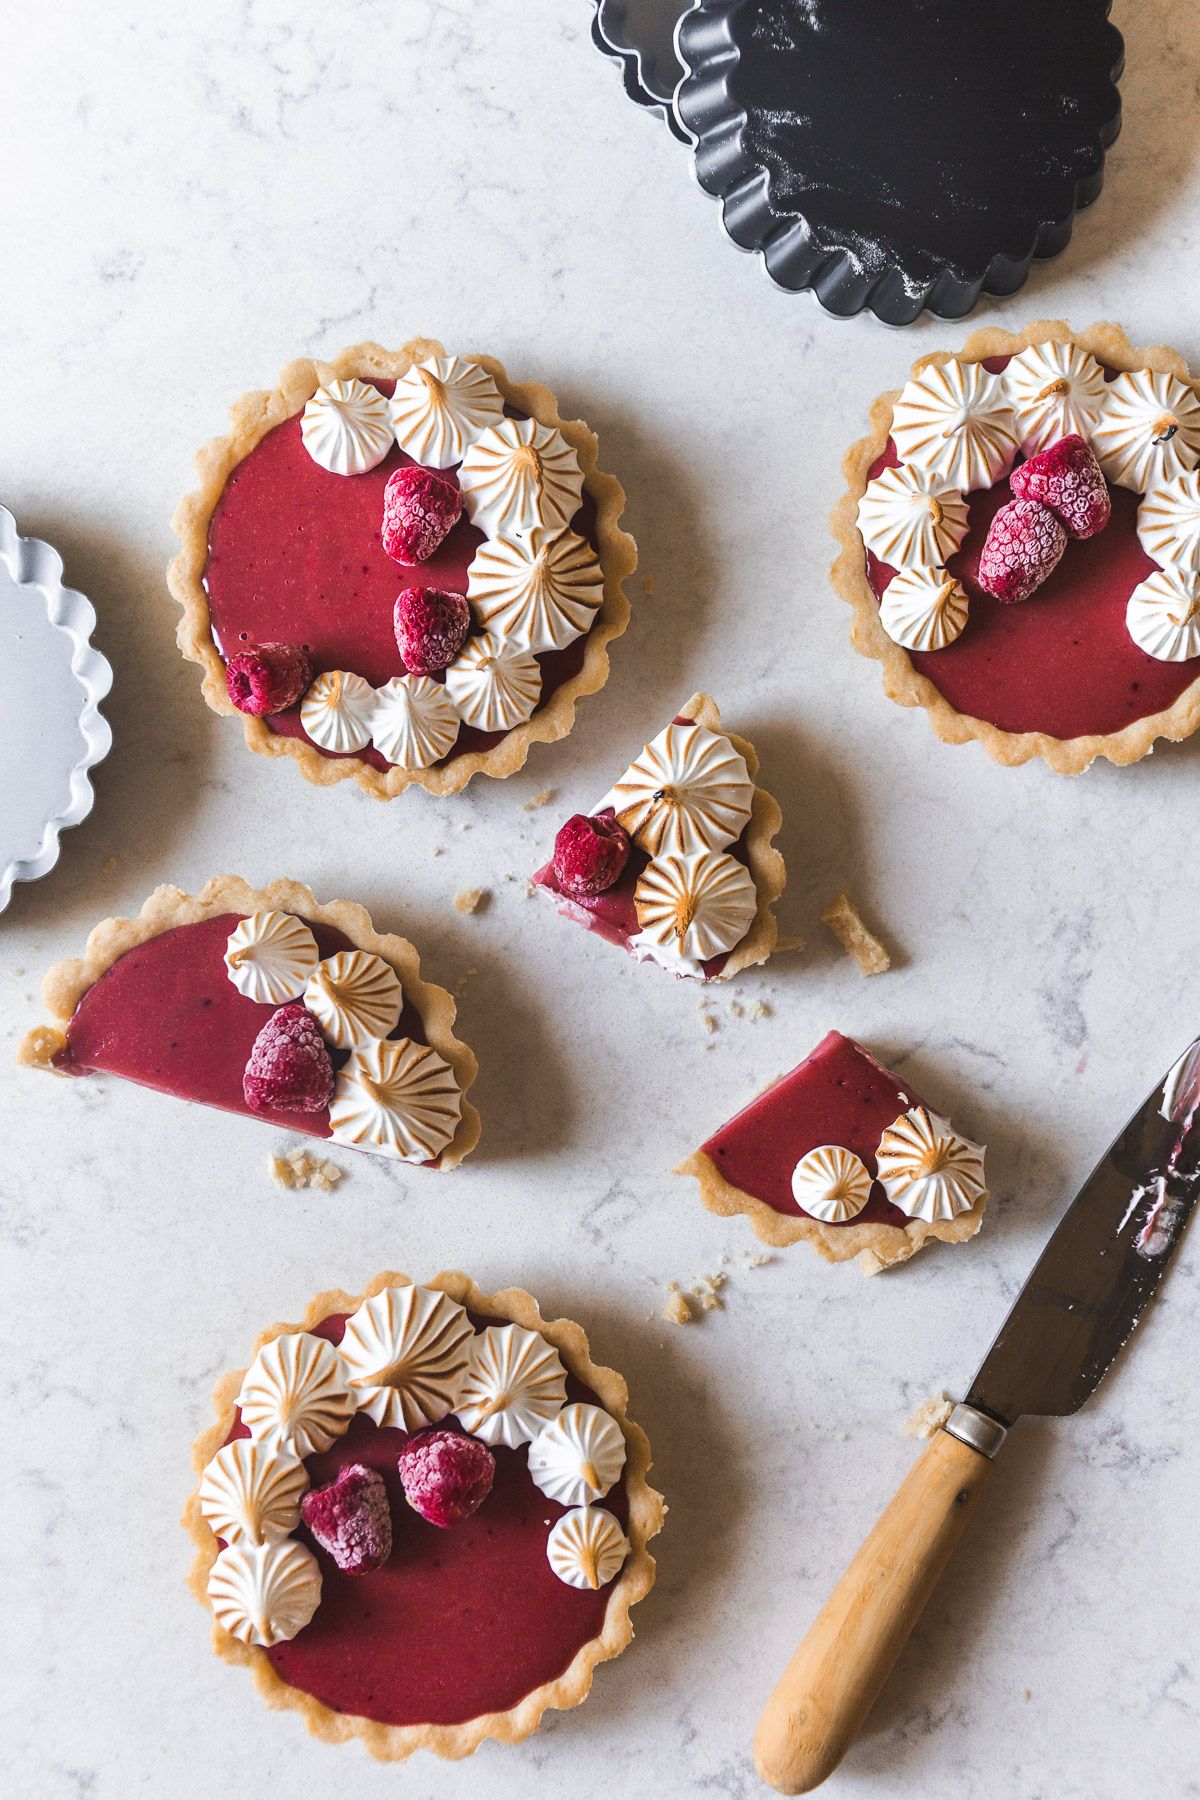 RASPBERRY INSPIRATION and Hibiscus Meringue Tartlets Recipe by Karlee Flores